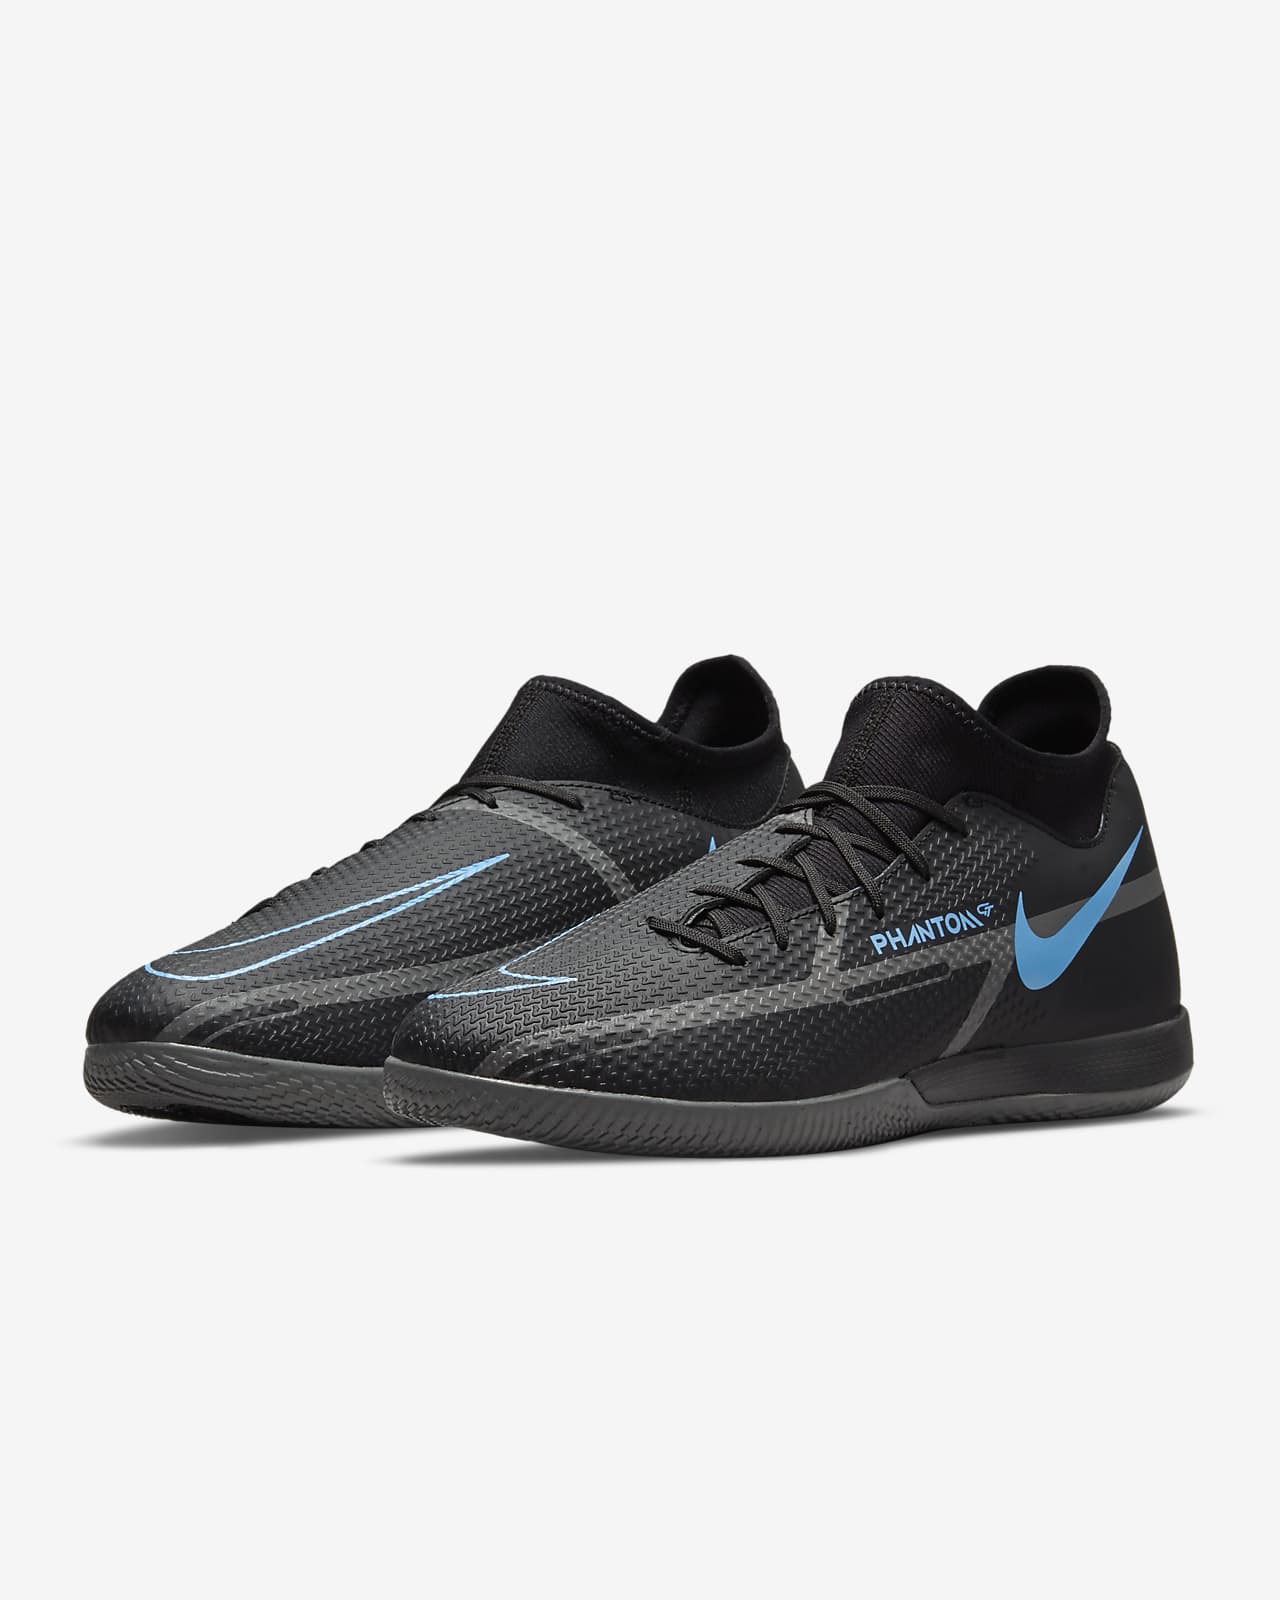 nike phantom gt academy dynamic fit indoor soccer shoes